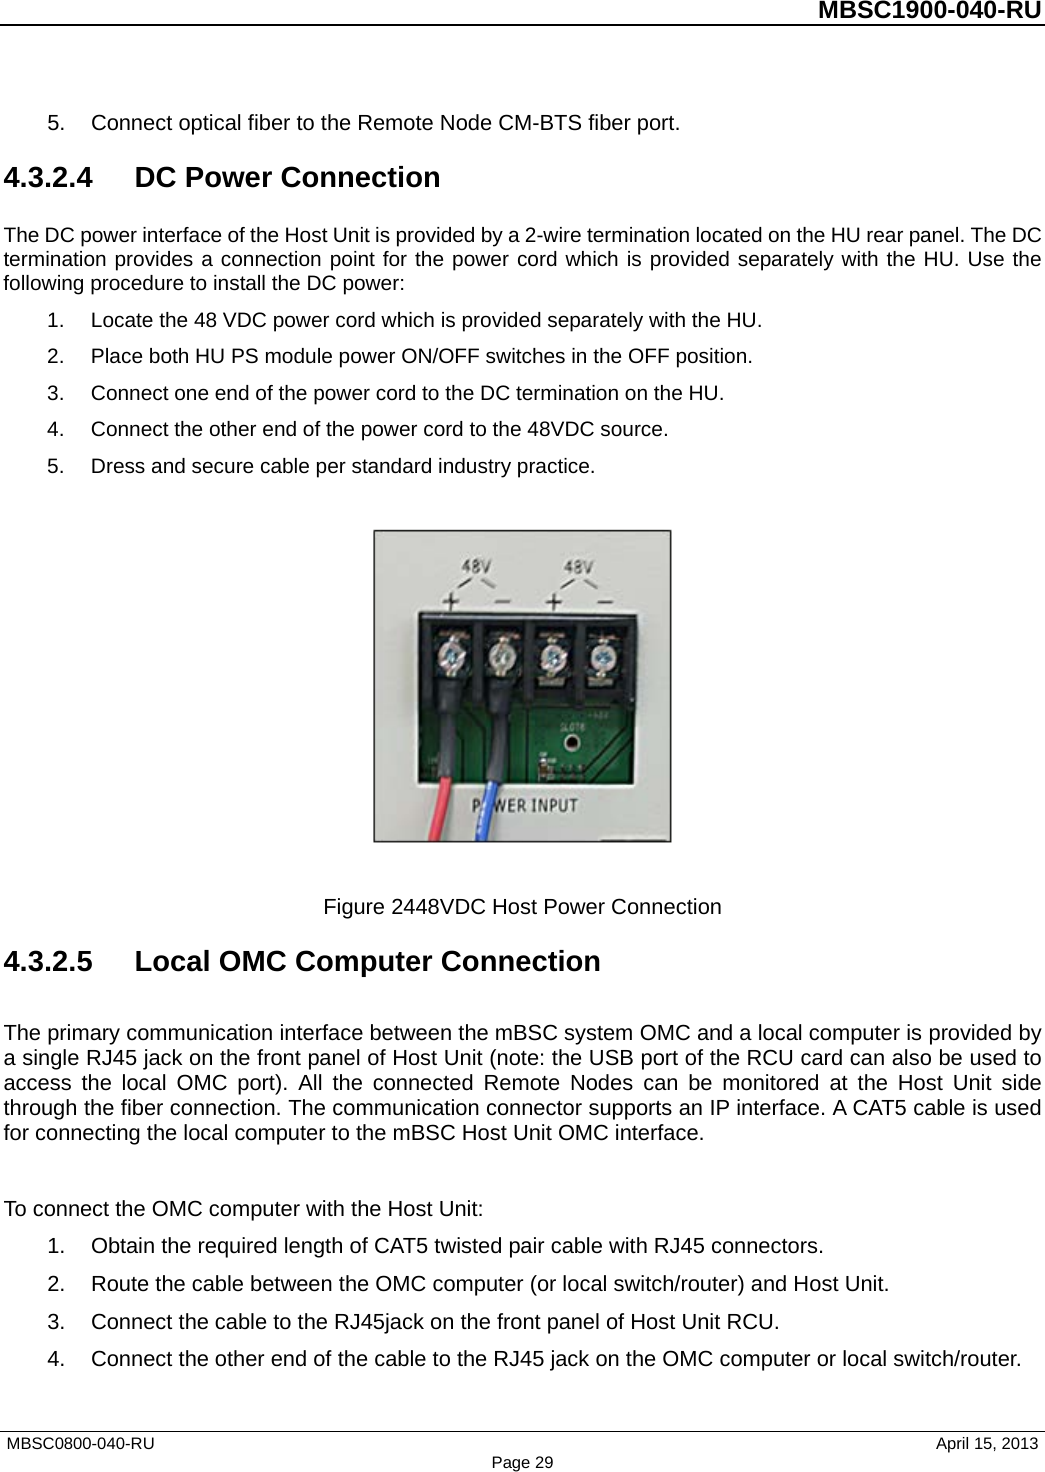          MBSC1900-040-RU   5. Connect optical fiber to the Remote Node CM-BTS fiber port. 4.3.2.4  DC Power Connection The DC power interface of the Host Unit is provided by a 2-wire termination located on the HU rear panel. The DC termination provides a connection point for the power cord which is provided separately with the HU. Use the following procedure to install the DC power: 1. Locate the 48 VDC power cord which is provided separately with the HU.   2. Place both HU PS module power ON/OFF switches in the OFF position. 3. Connect one end of the power cord to the DC termination on the HU. 4. Connect the other end of the power cord to the 48VDC source. 5. Dress and secure cable per standard industry practice.    Figure 2448VDC Host Power Connection 4.3.2.5 Local OMC Computer Connection The primary communication interface between the mBSC system OMC and a local computer is provided by a single RJ45 jack on the front panel of Host Unit (note: the USB port of the RCU card can also be used to access the local OMC port). All the connected Remote Nodes can be monitored at the Host Unit side through the fiber connection. The communication connector supports an IP interface. A CAT5 cable is used for connecting the local computer to the mBSC Host Unit OMC interface.  To connect the OMC computer with the Host Unit: 1. Obtain the required length of CAT5 twisted pair cable with RJ45 connectors. 2. Route the cable between the OMC computer (or local switch/router) and Host Unit. 3. Connect the cable to the RJ45jack on the front panel of Host Unit RCU. 4. Connect the other end of the cable to the RJ45 jack on the OMC computer or local switch/router. MBSC0800-040-RU                                      April 15, 2013 Page 29 